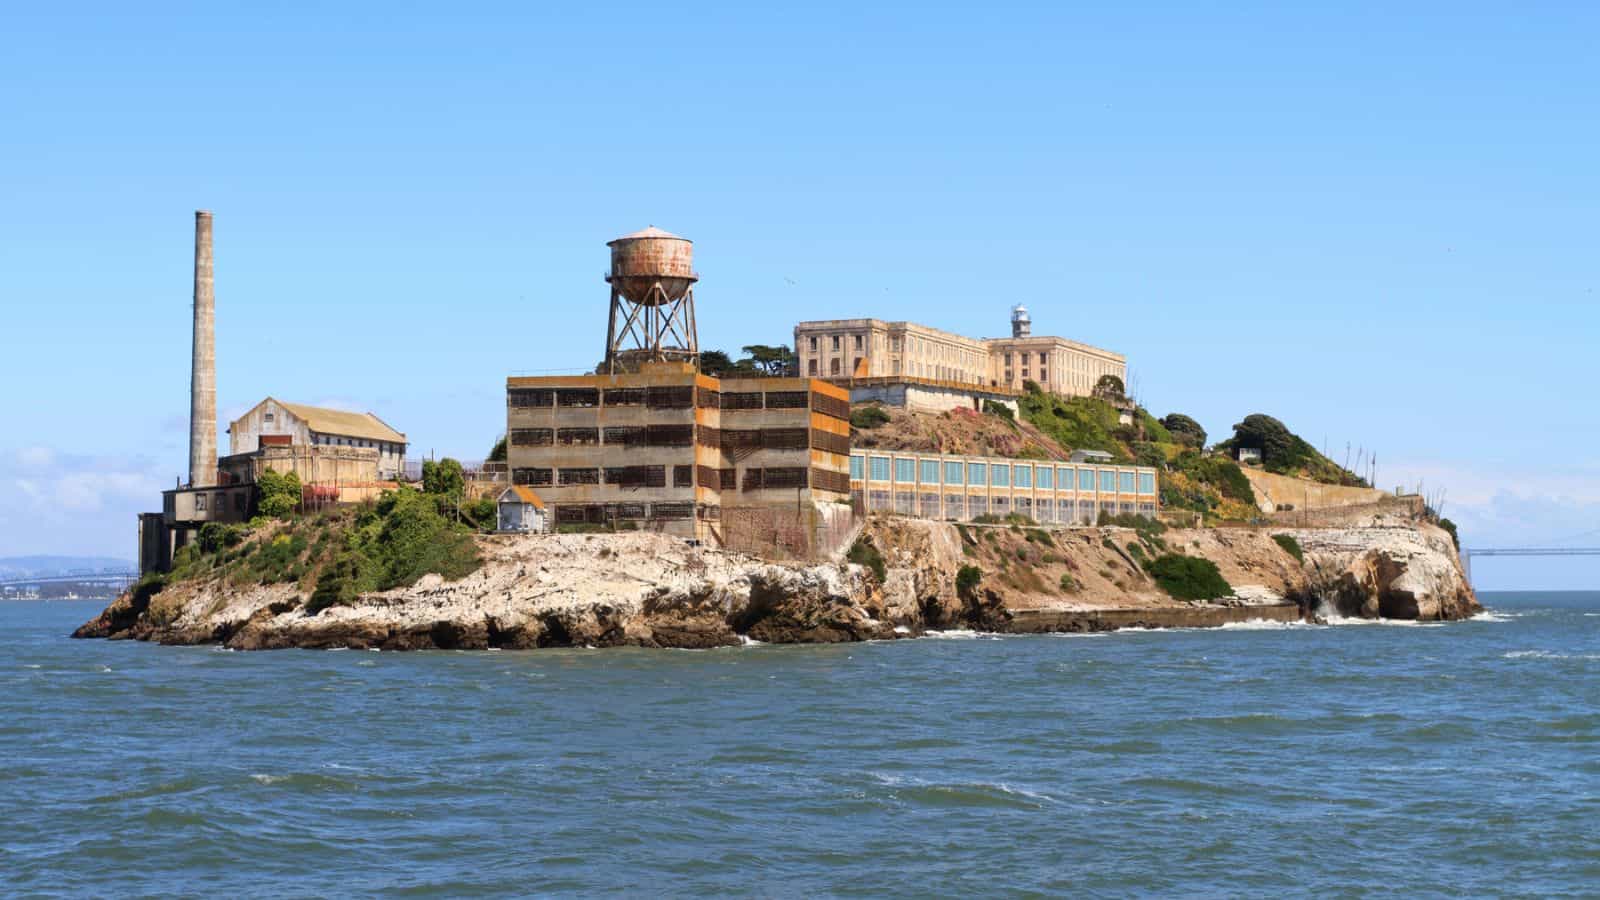 <p><span>Escape attempts from Alcatraz were tough, but escaping its eerie allure today is equally challenging. </span></p><p><a href="https://frenzhub.com/bucket-list-wonders-explore-the-timeless-beauty-of-these-14-american-landmarks/"><span>Modern visitors</span></a><span> often fend off frigid isolation-cell shivers while contemplating if “The Rock” might also refer to the sinking feeling in their stomachs during late-night tours.</span></p>